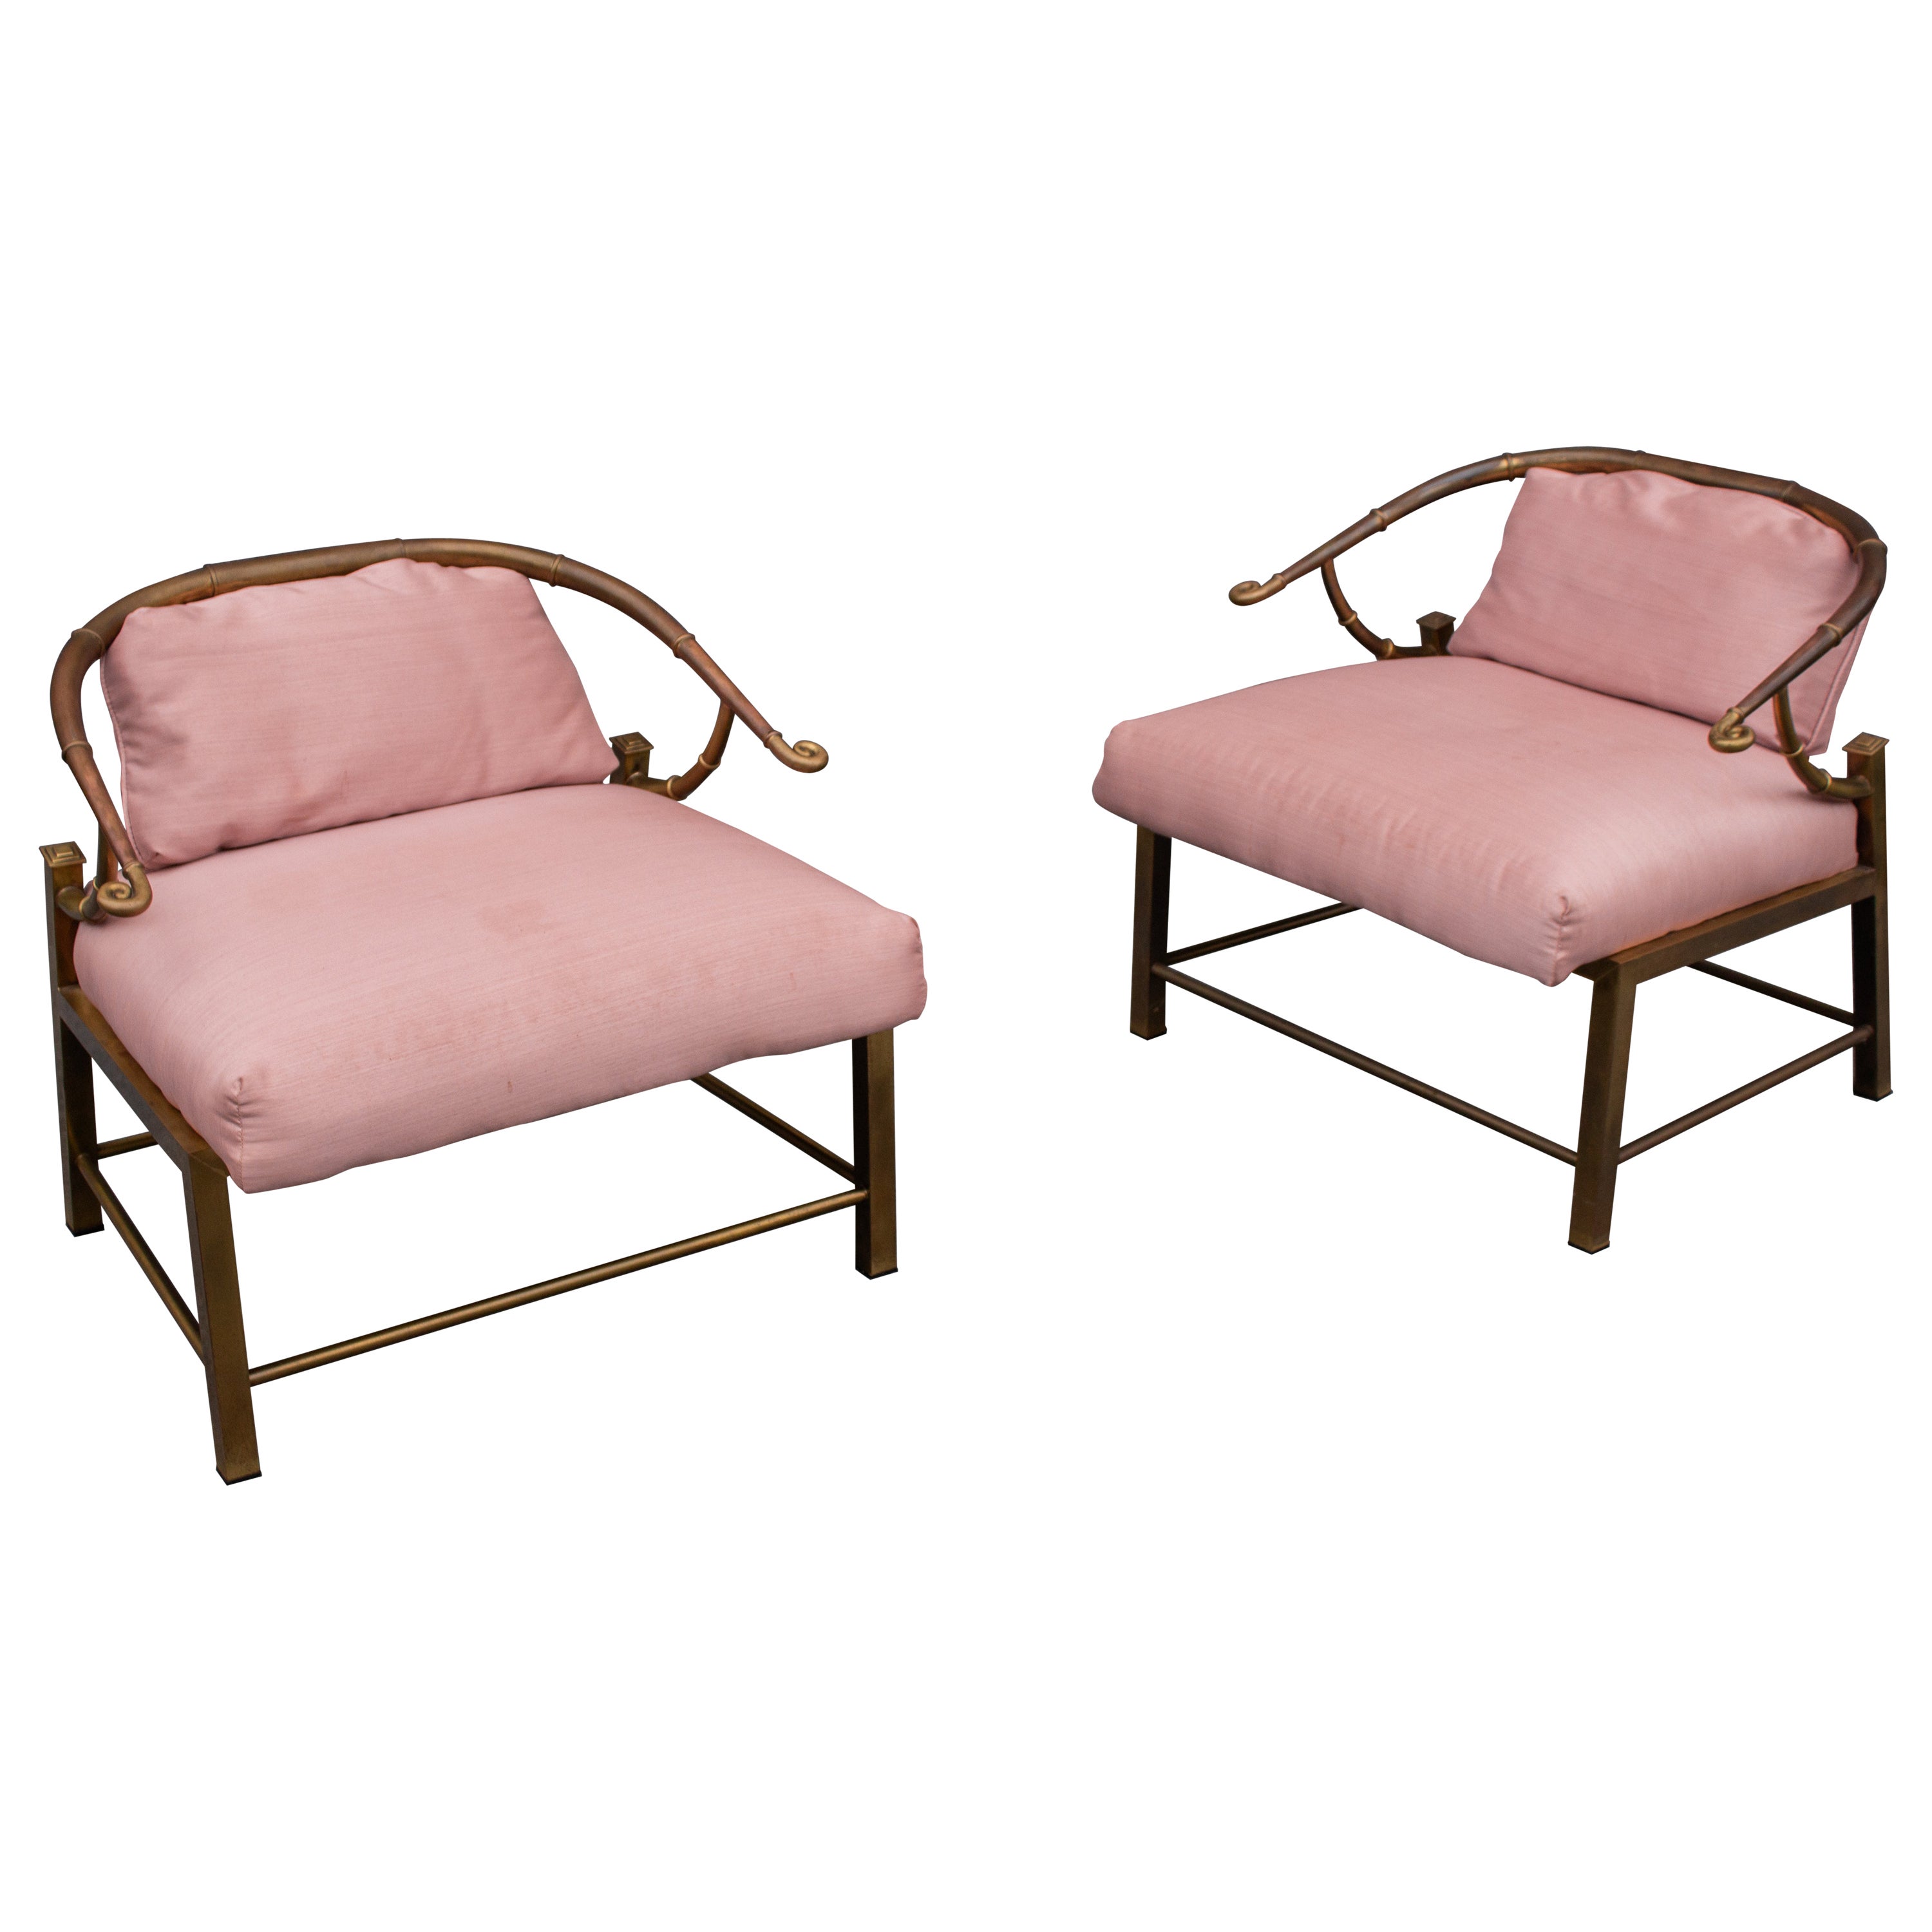 Pair of Warren Lloyd for Mastercraft Brass & Pink Fabric 'Empress' Lounge Chairs For Sale